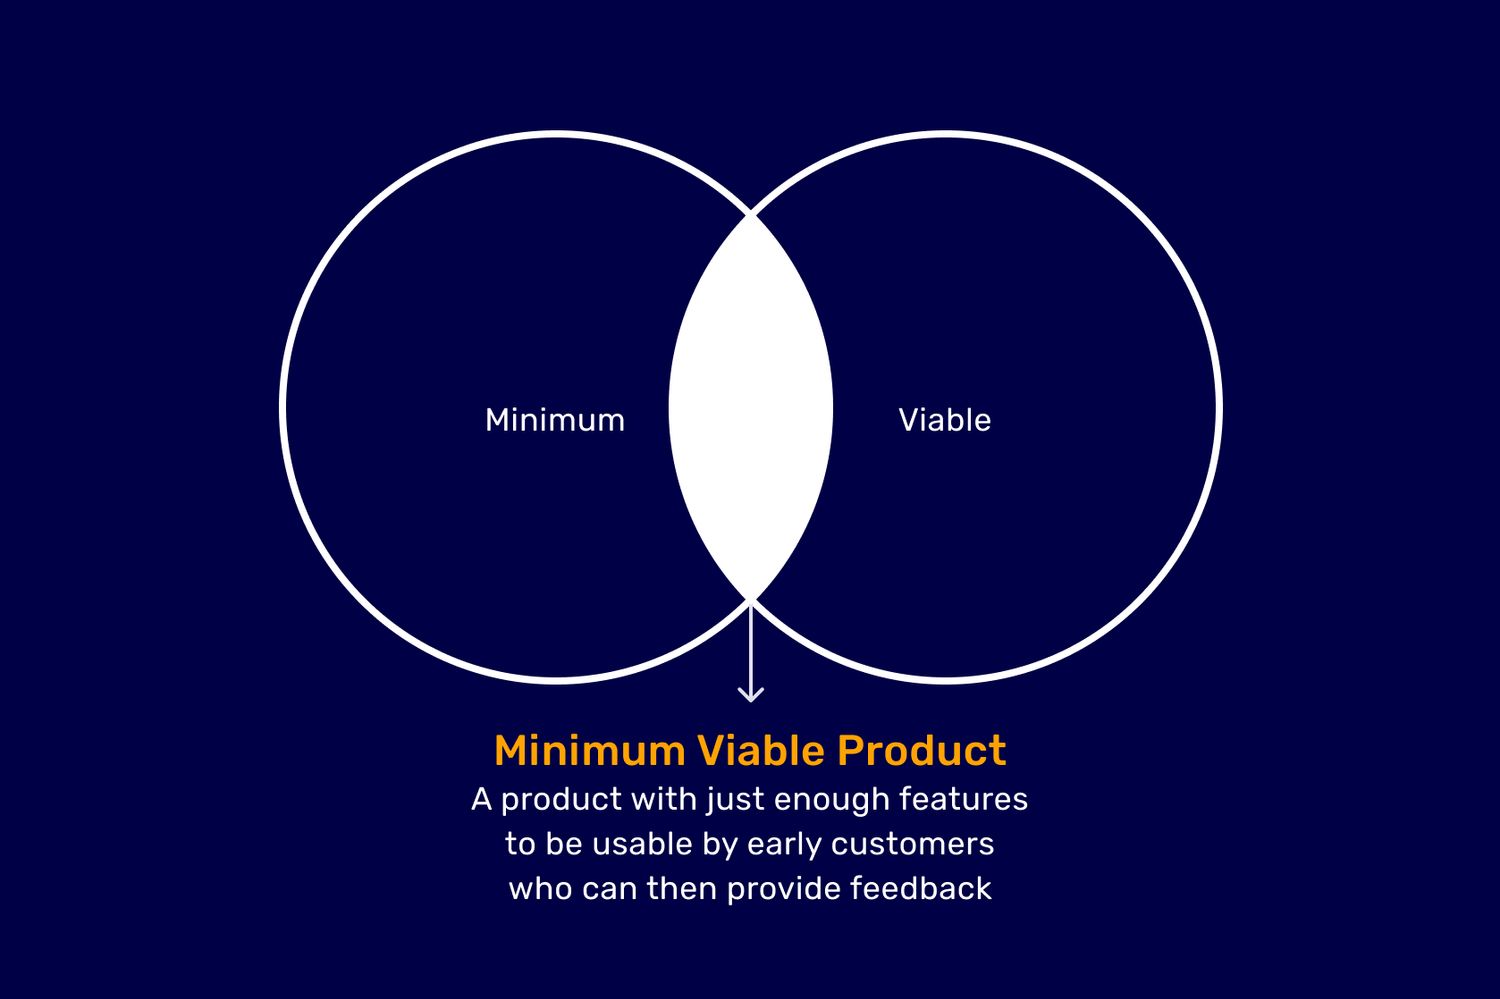 Minimum Viable Product - A product with just enough features to be usable by early customers who can then provide feedback